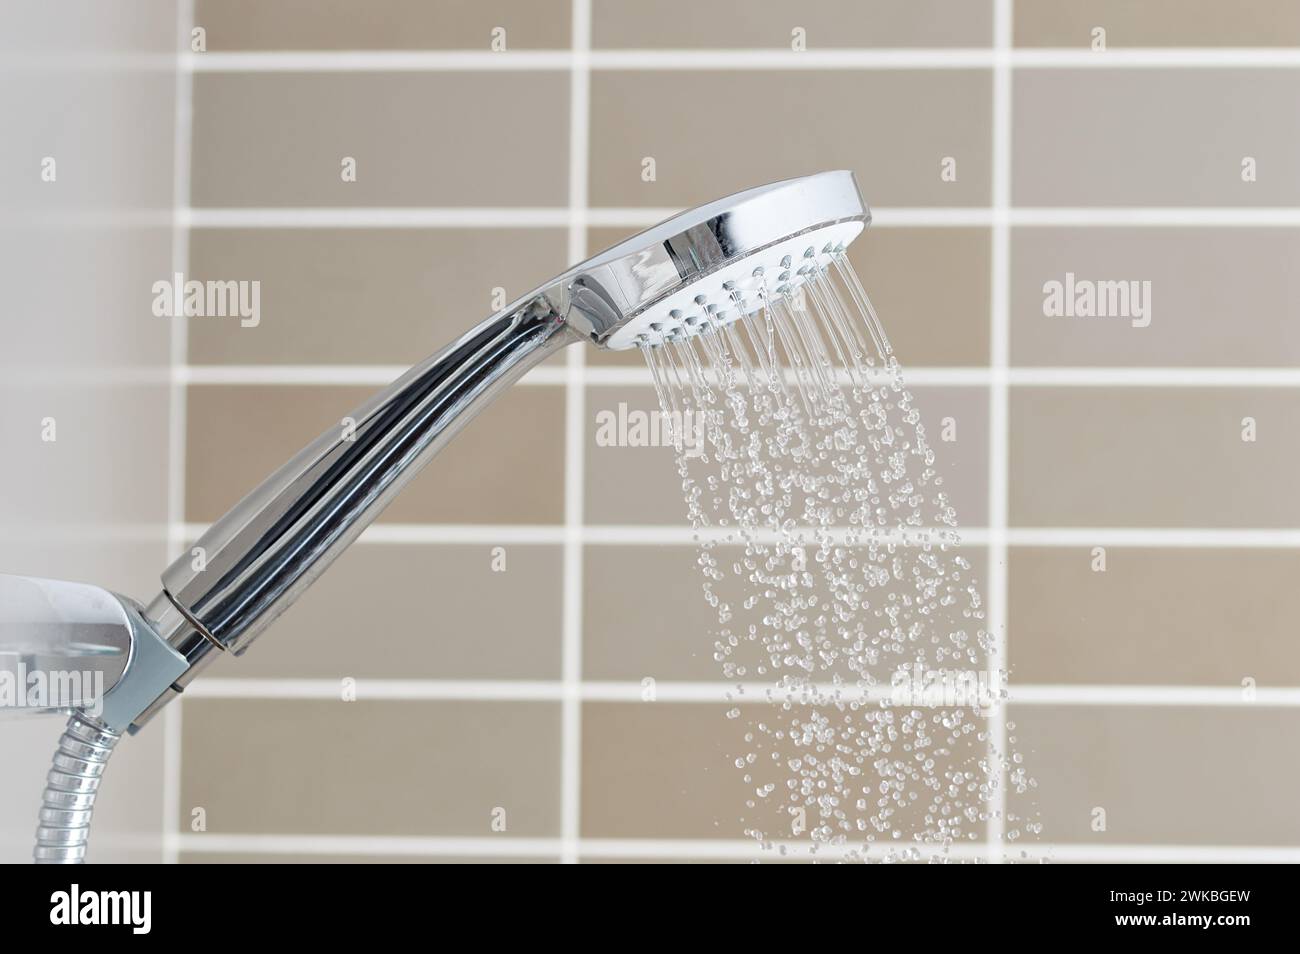 Close to the water shower head that is closed Stock Photo